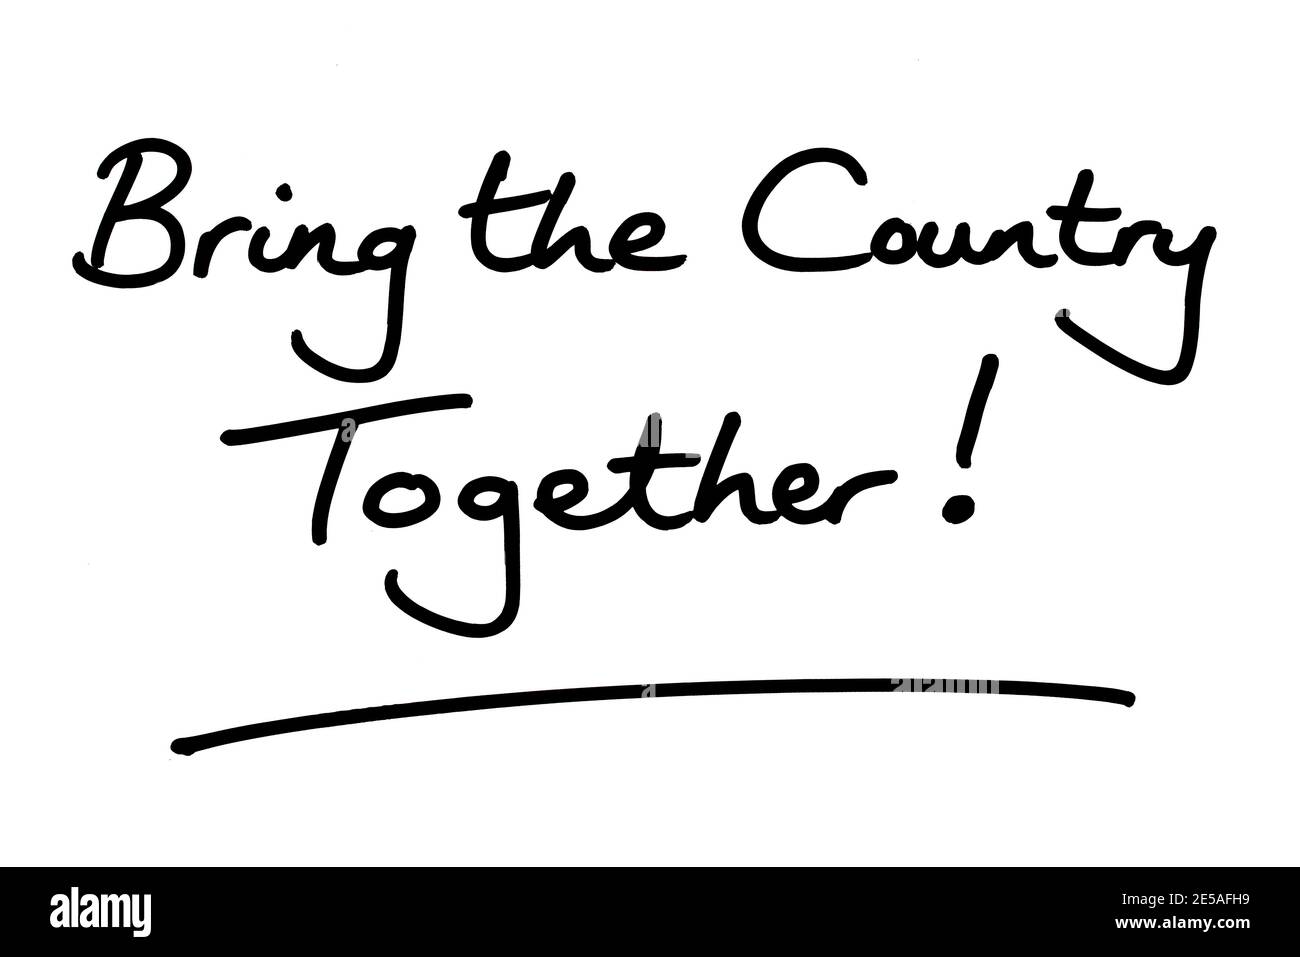 Bring the Country Together! handwritten on a white background. Stock Photo